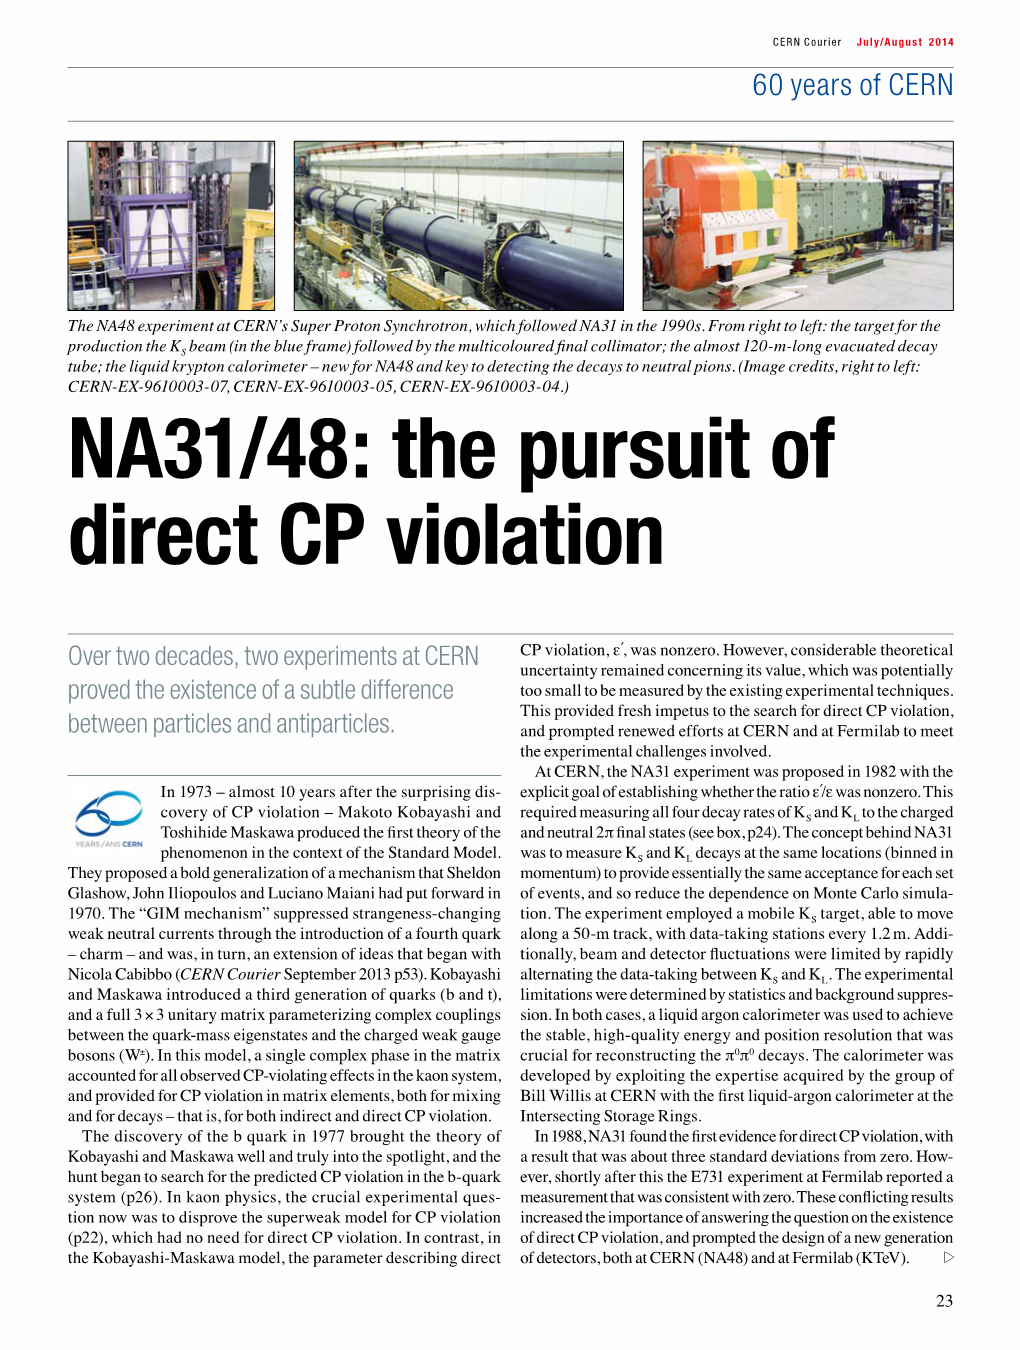 NA31/48: the Pursuit of Direct CP Violation